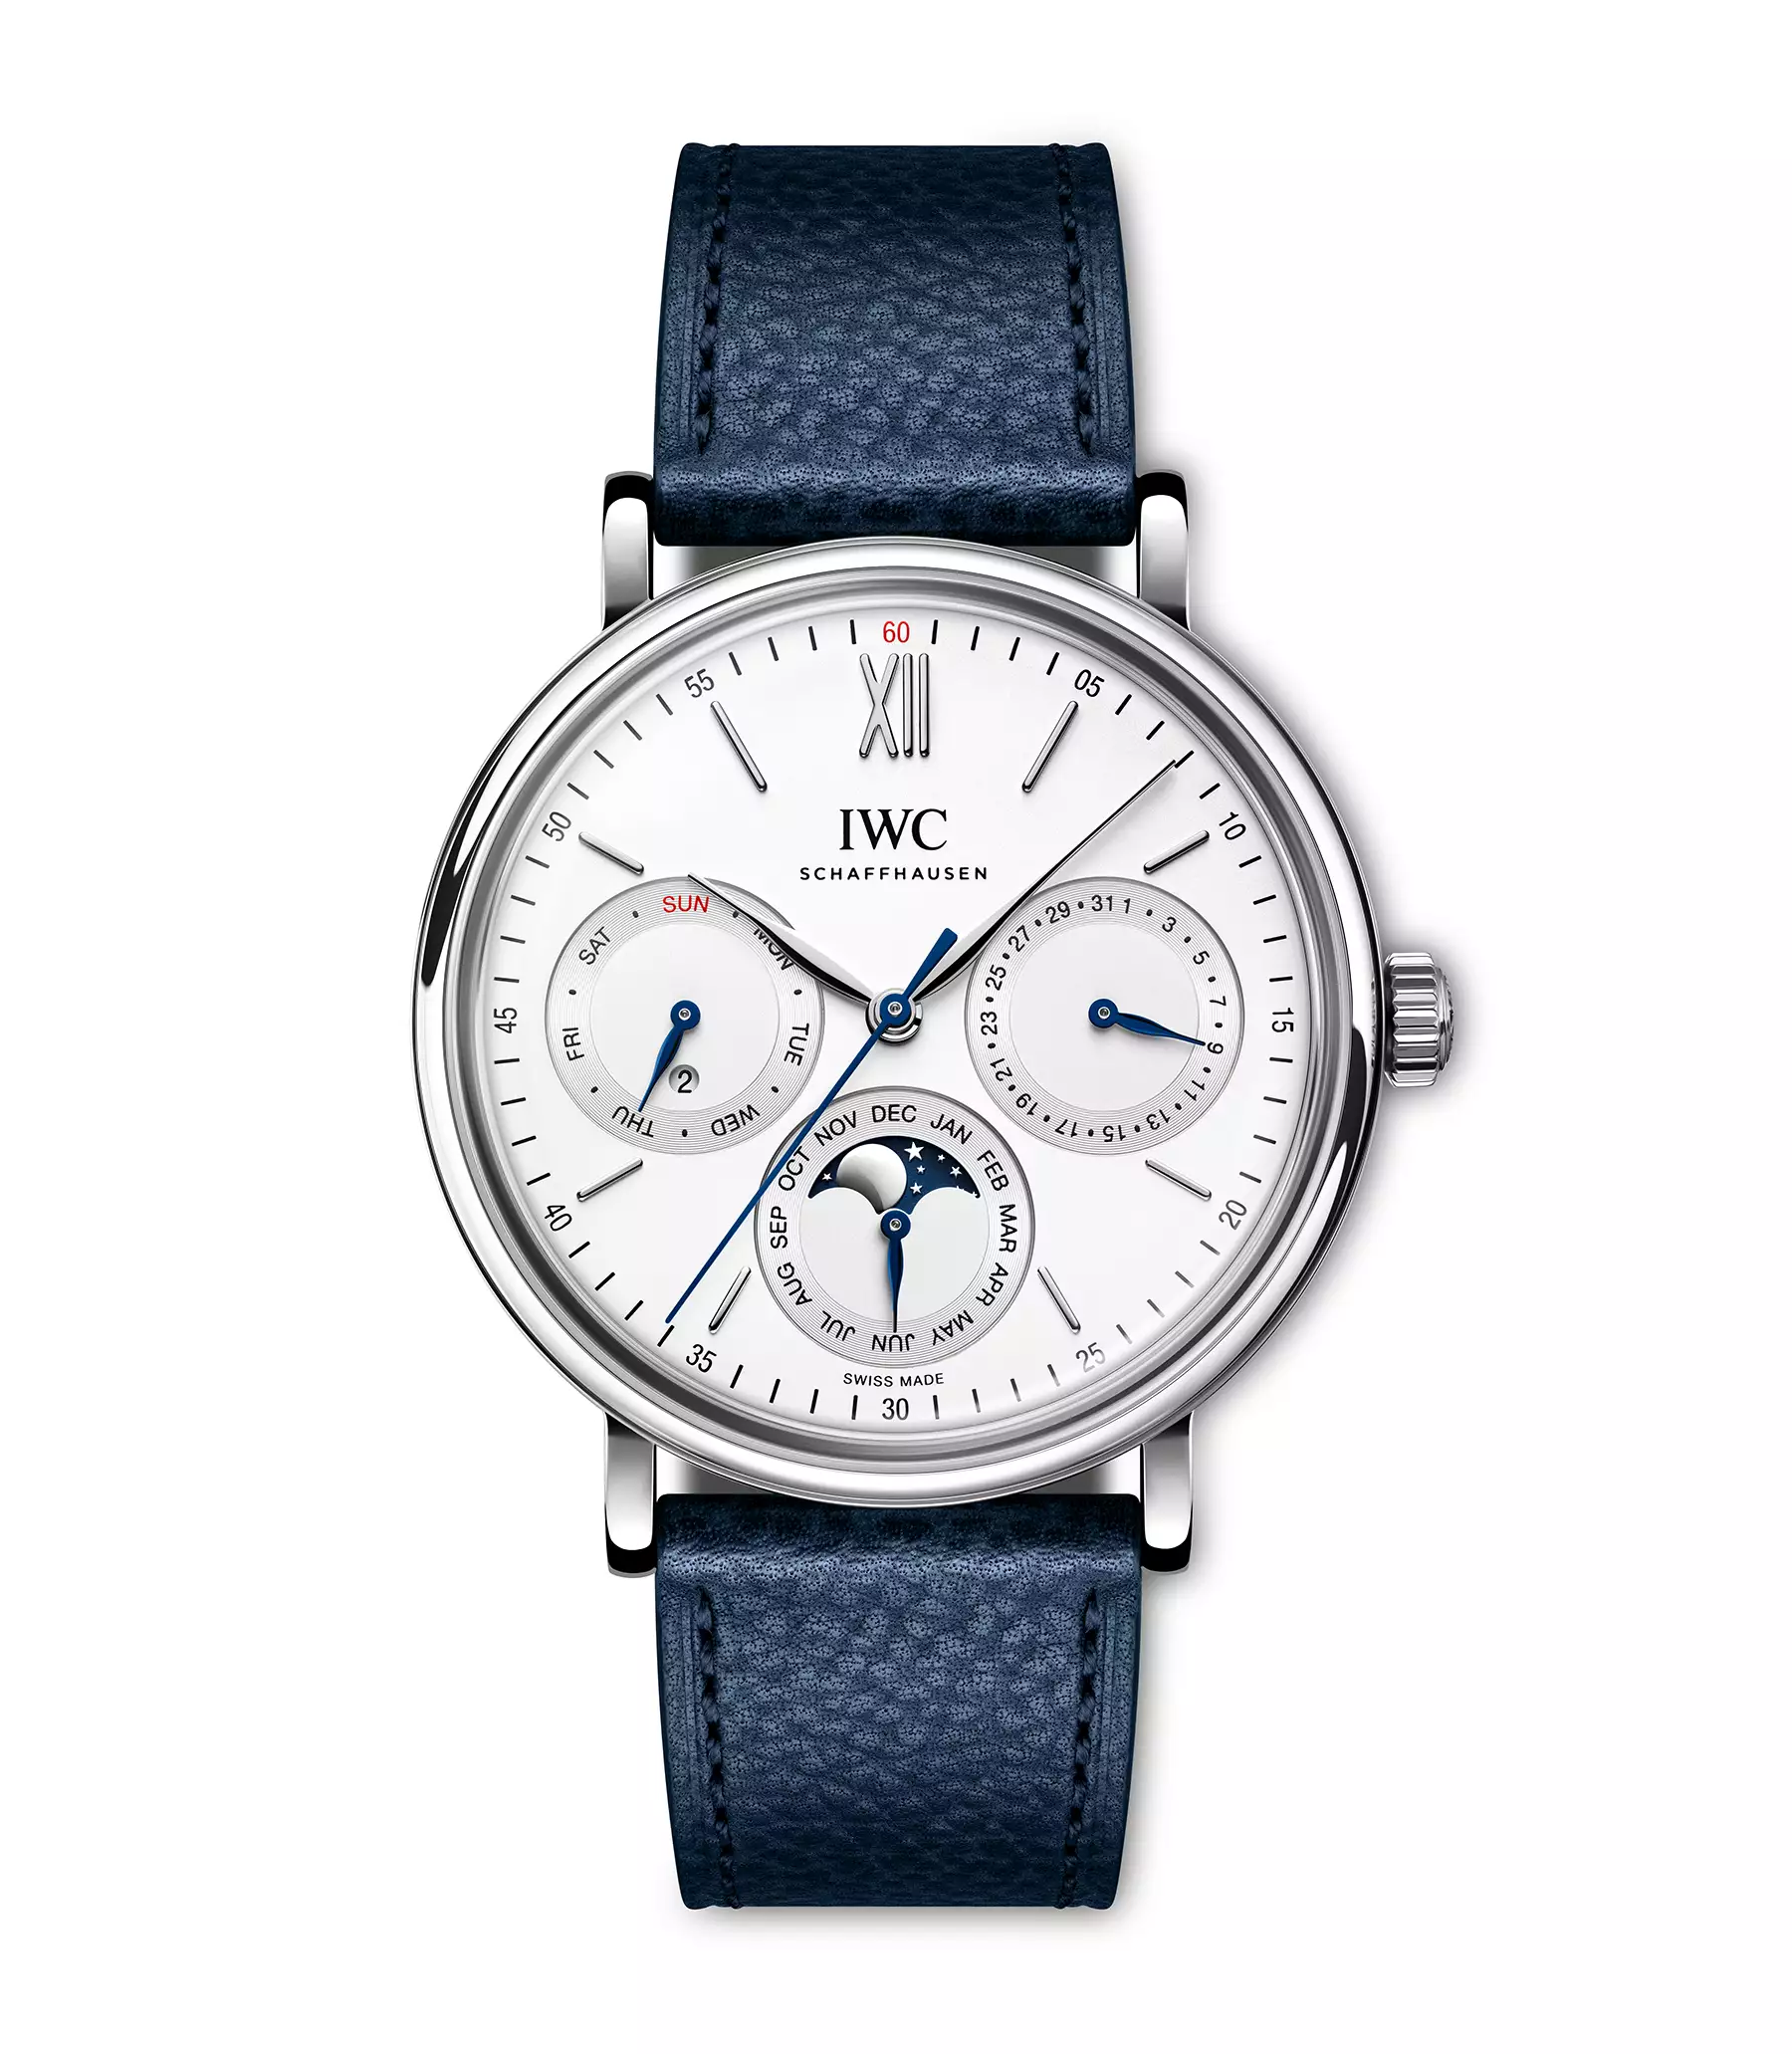 IWC Introduces New Perpetual Calendar within Portofino Collection